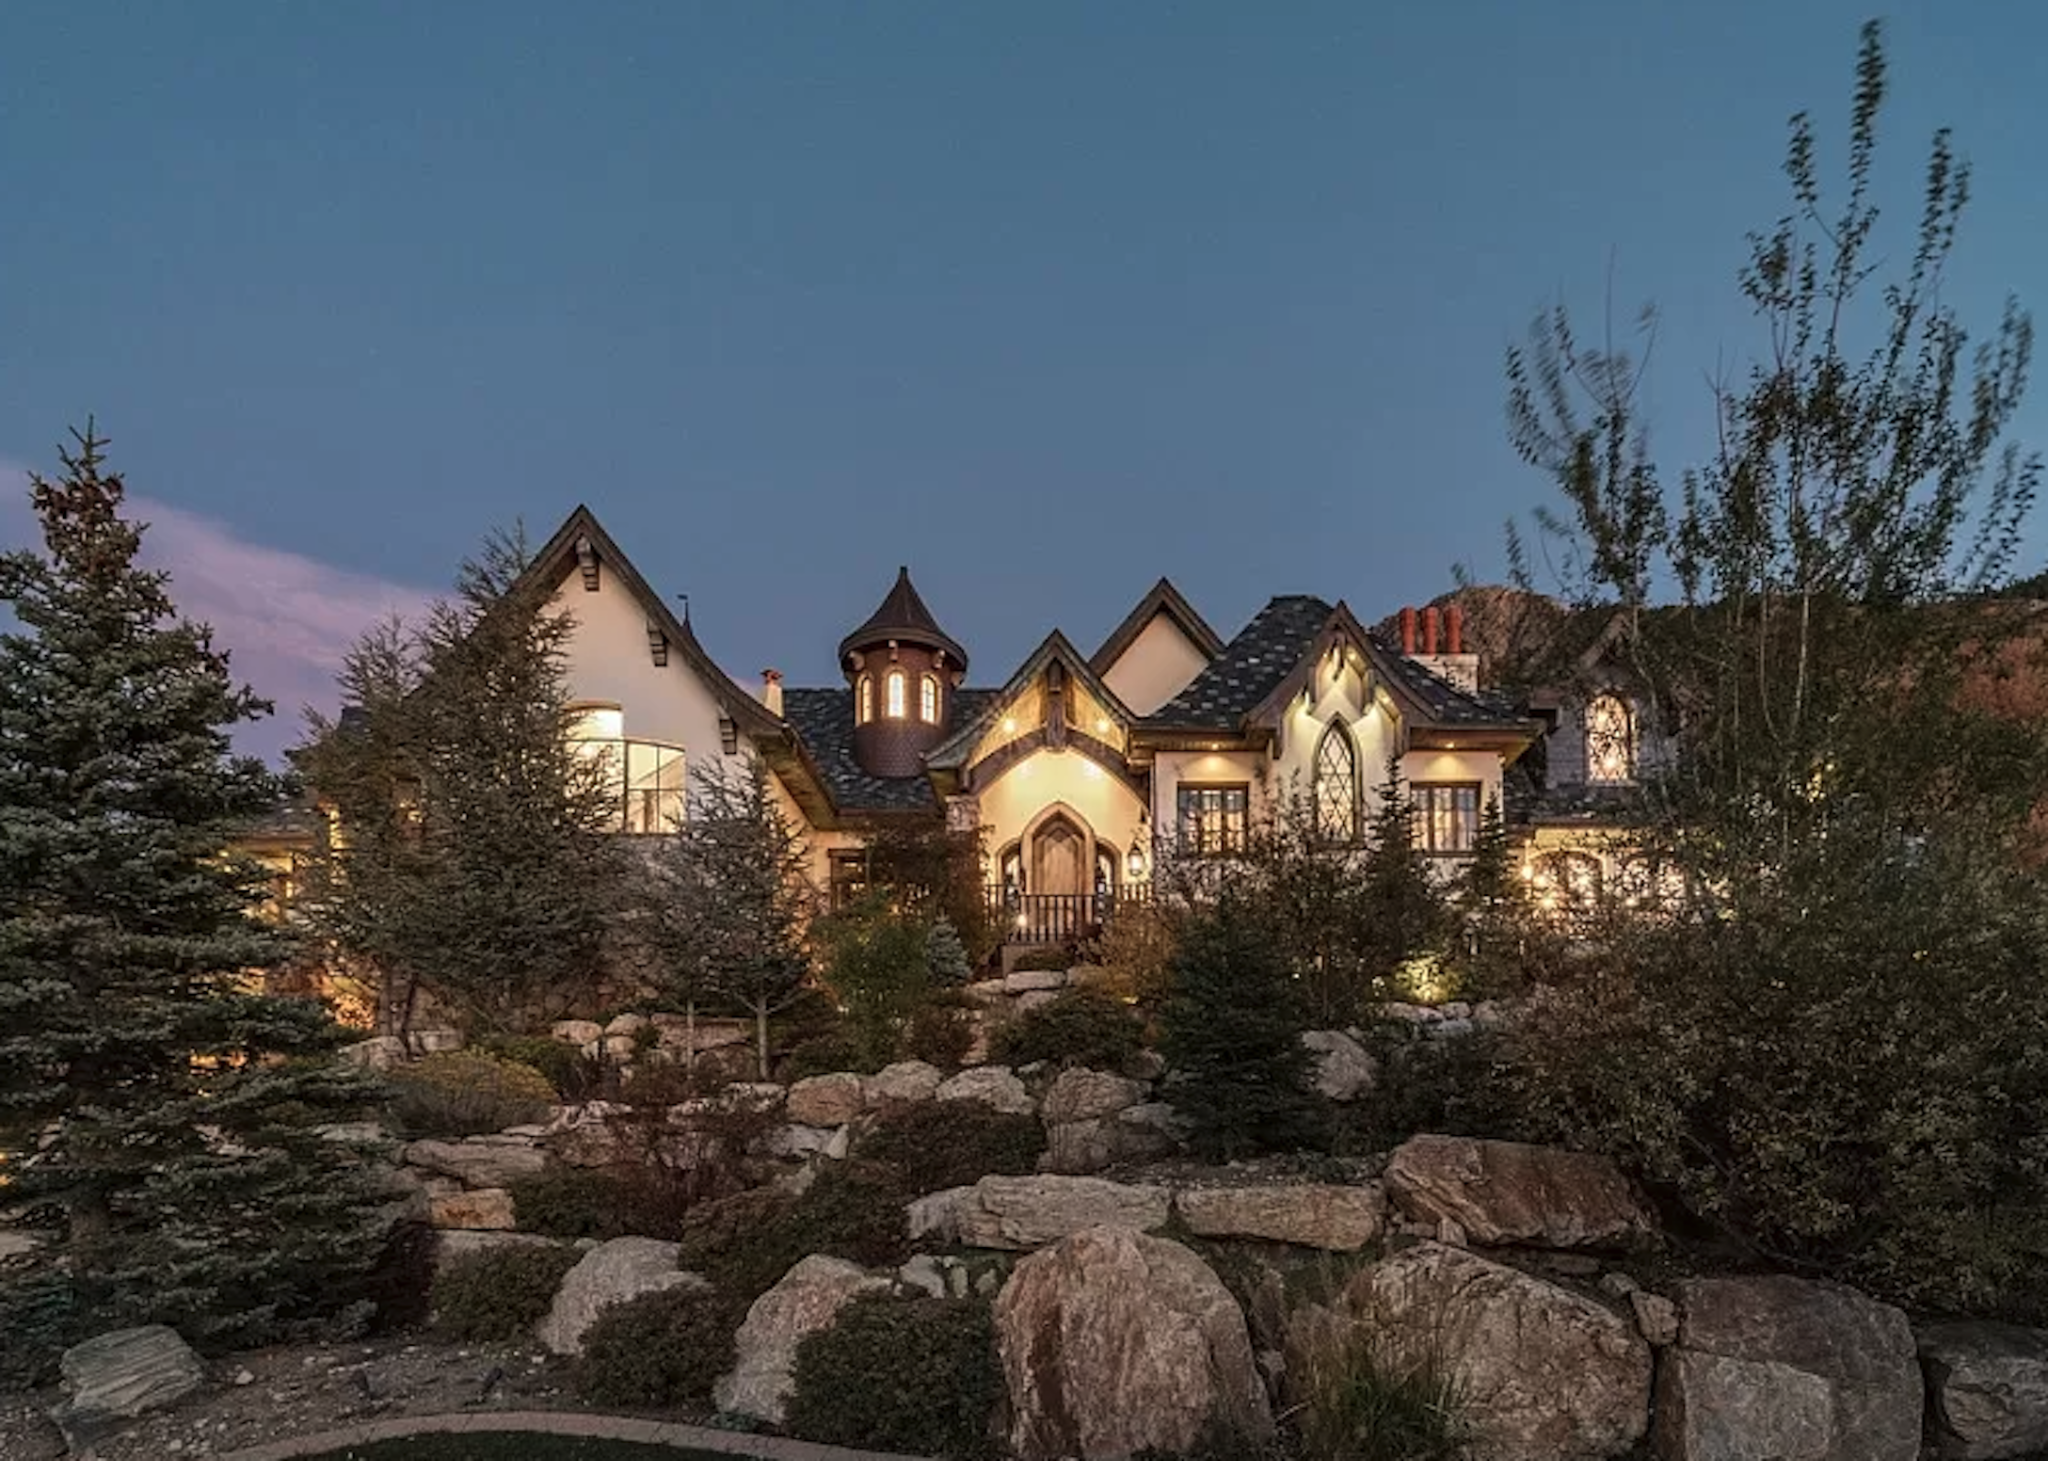 20 Utterly Insane Homes up for Sale Spotted on 'Zillow Gone Wild'